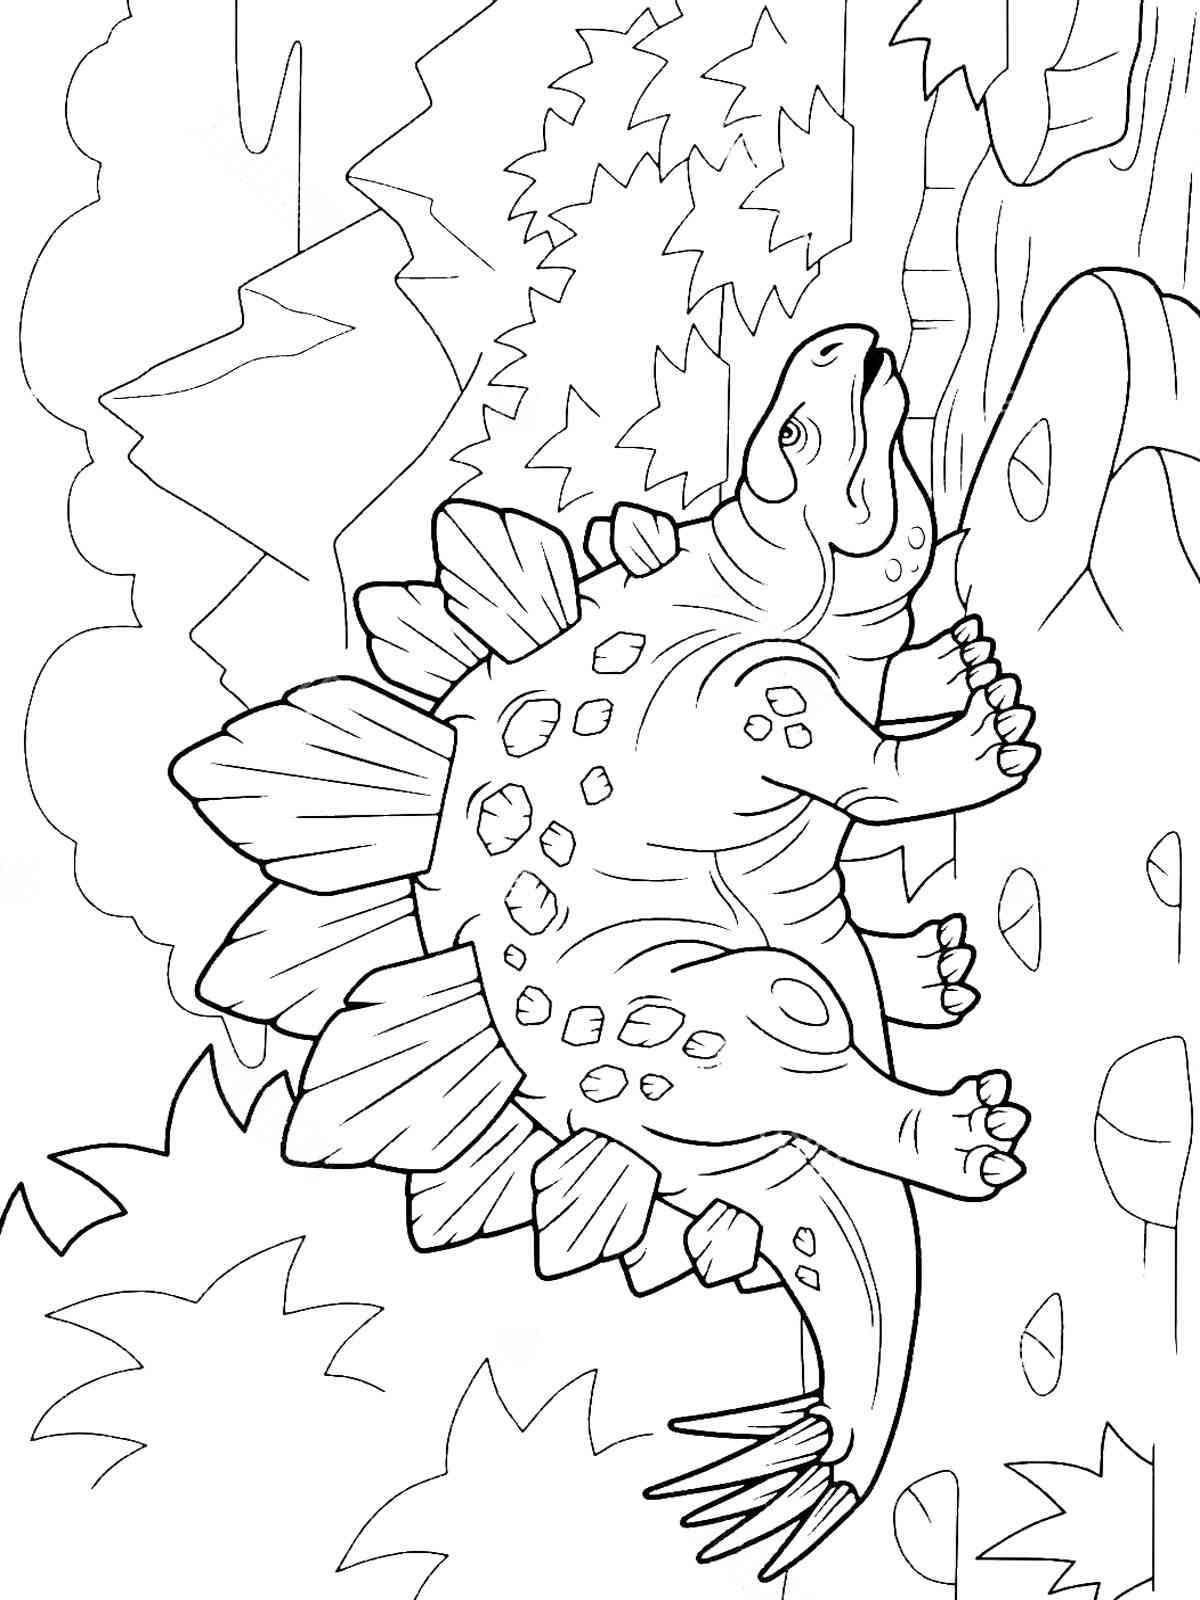 Stegosaurus on the Rock coloring page